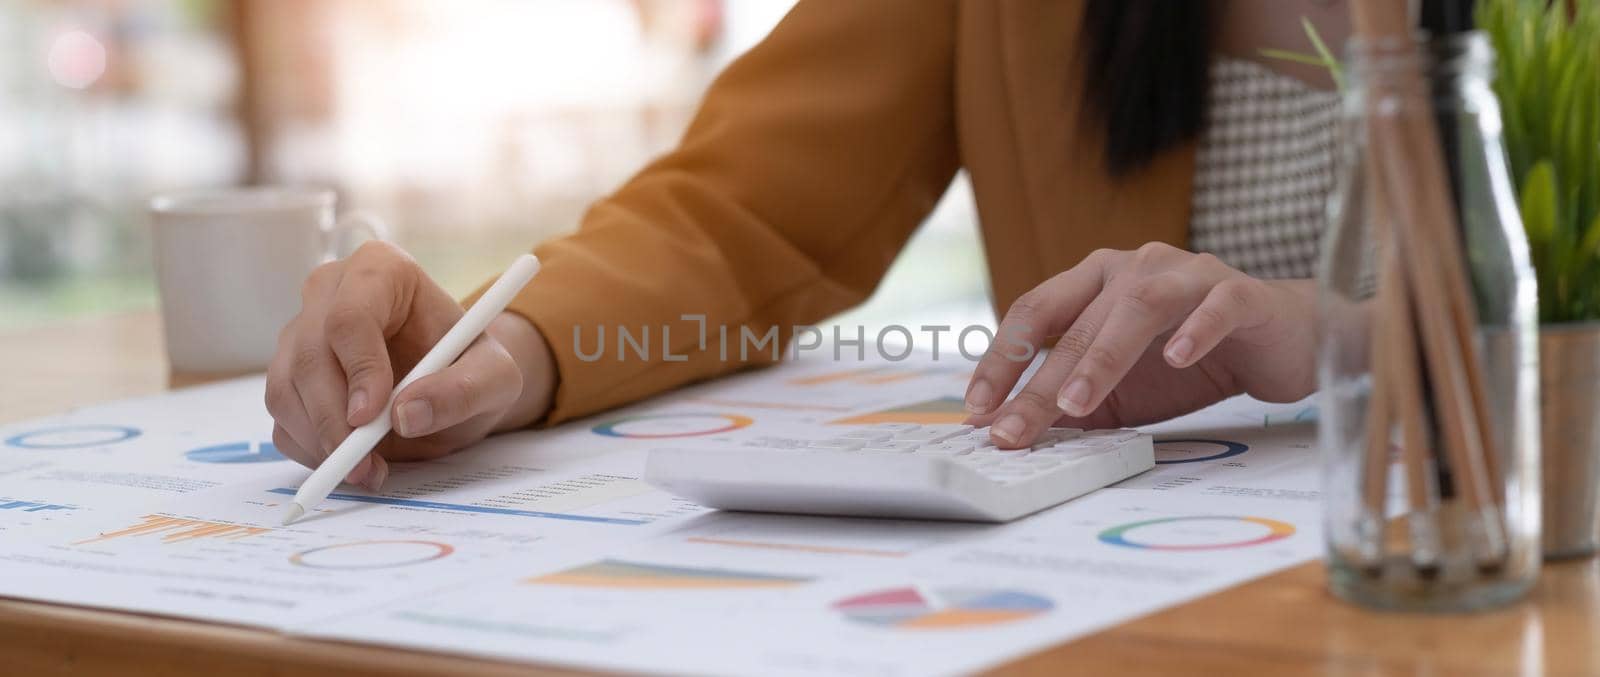 Business woman using calculator to calculate financial report, working at office with laptop computer on table. Asian female accountant or banker making calculations. finances and economy concept.